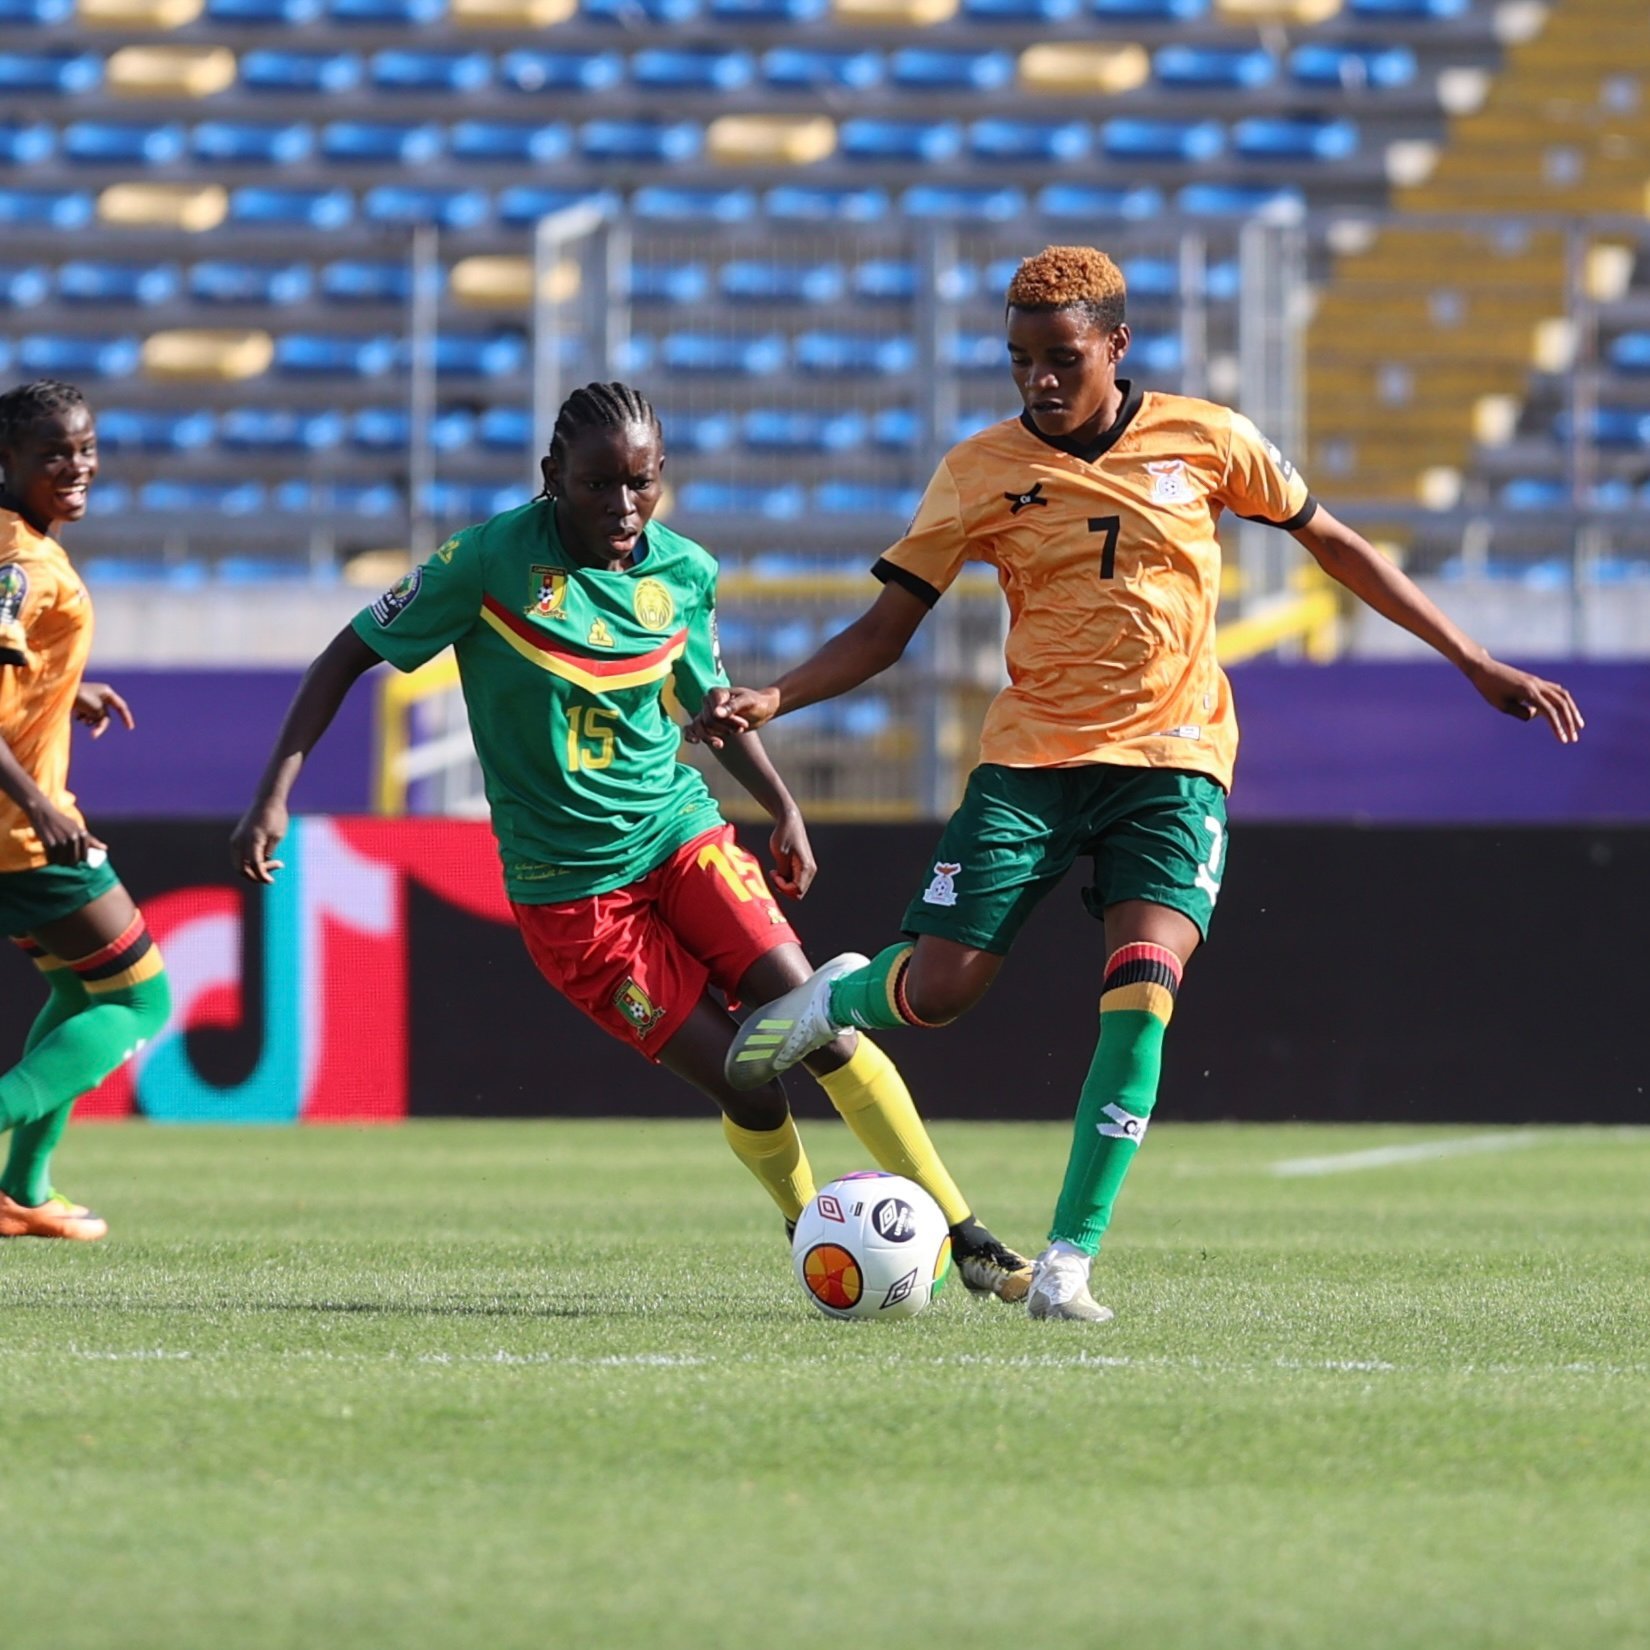 Zambia Women's National Team Draws Against Cameroon In Africa Cup Women's Games